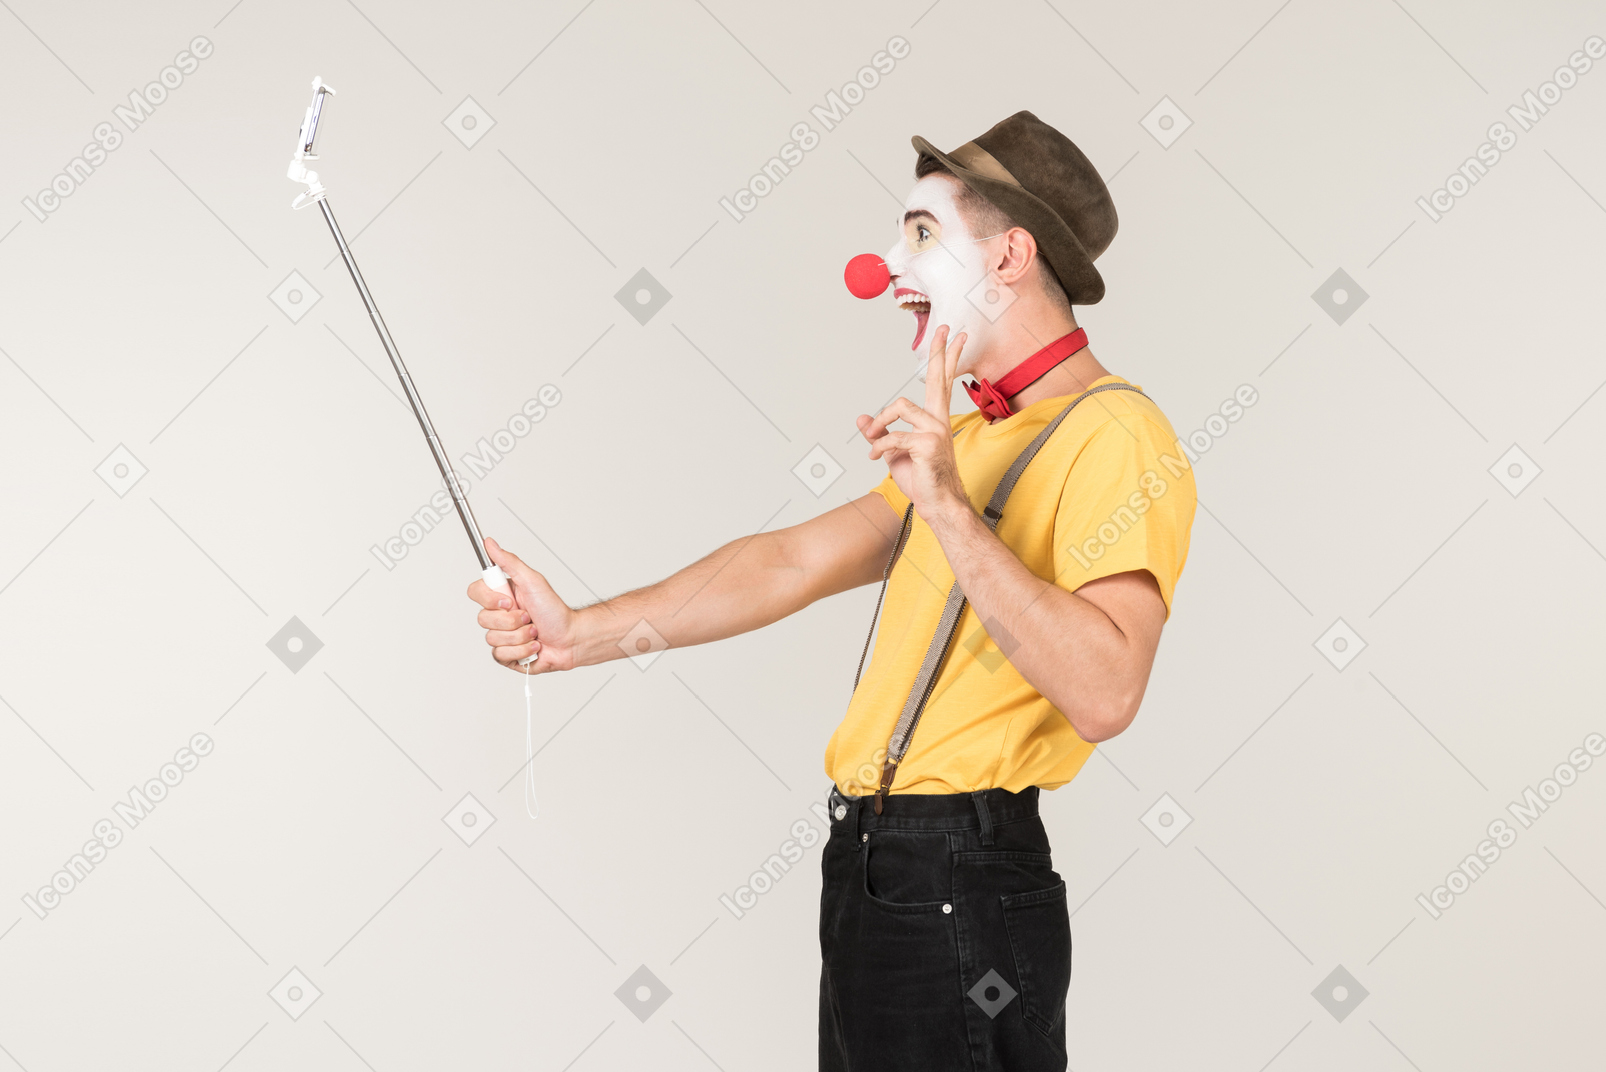 Male clown showing peace gesture and making a selfie